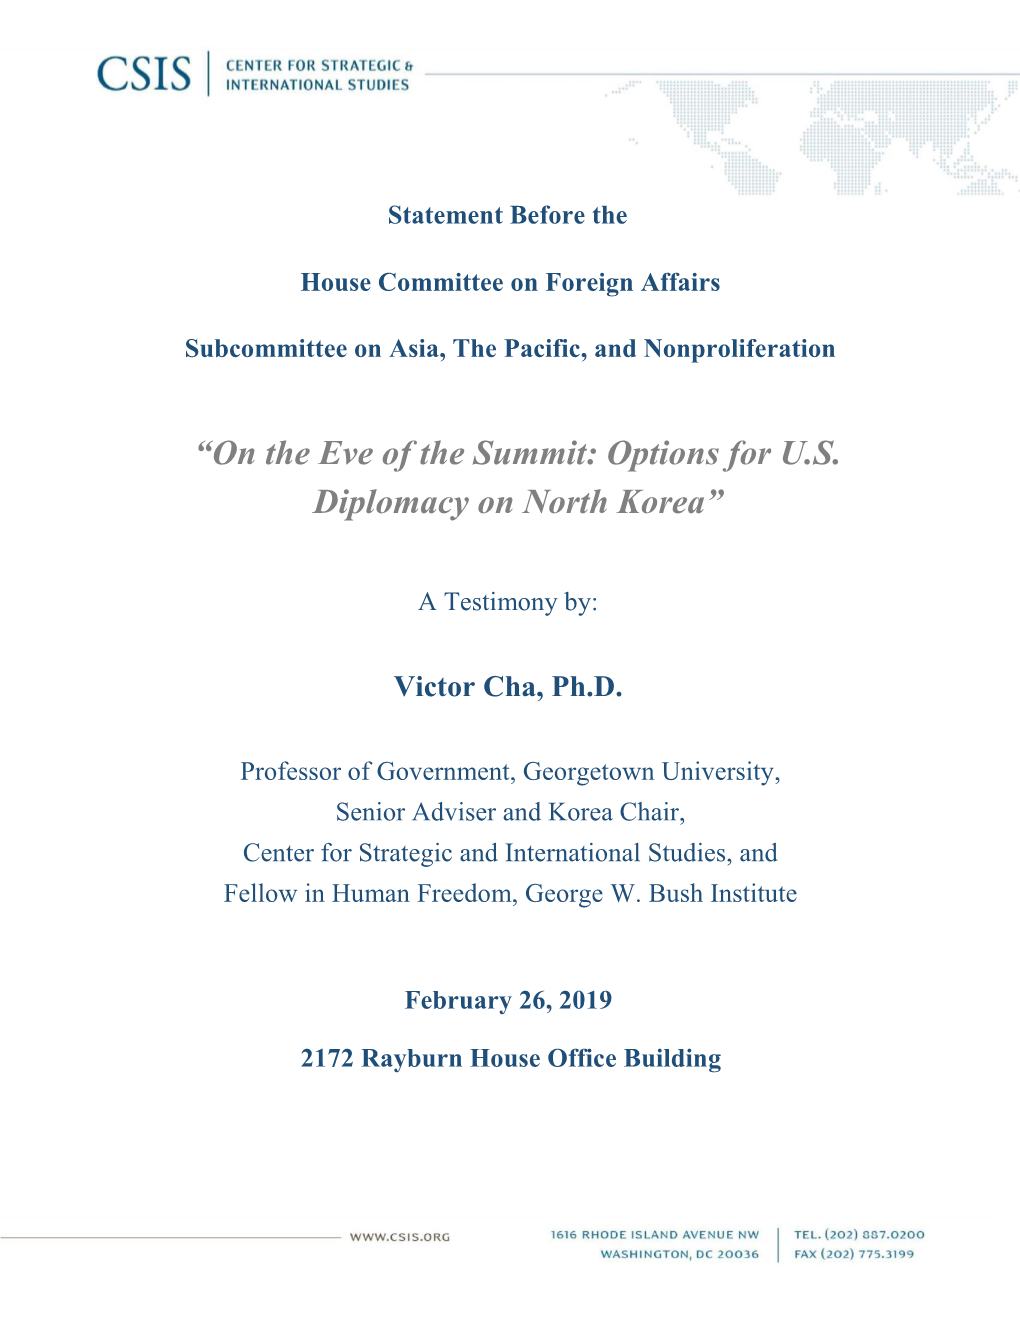 “On the Eve of the Summit: Options for U.S. Diplomacy on North Korea”